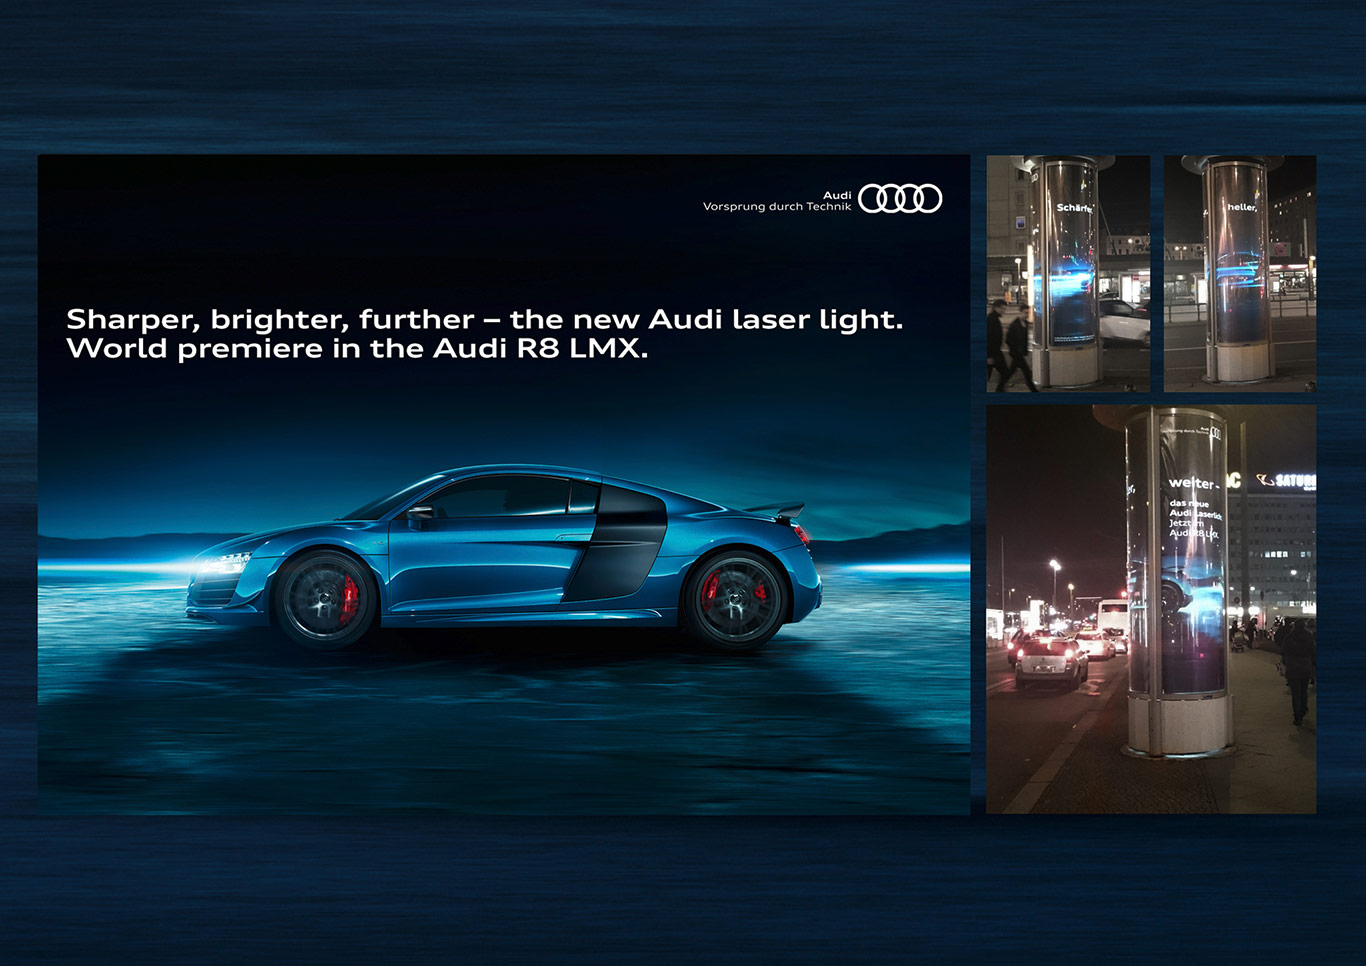 4-Audi-R8-LMX-Laserlight-'Out-of-Home'